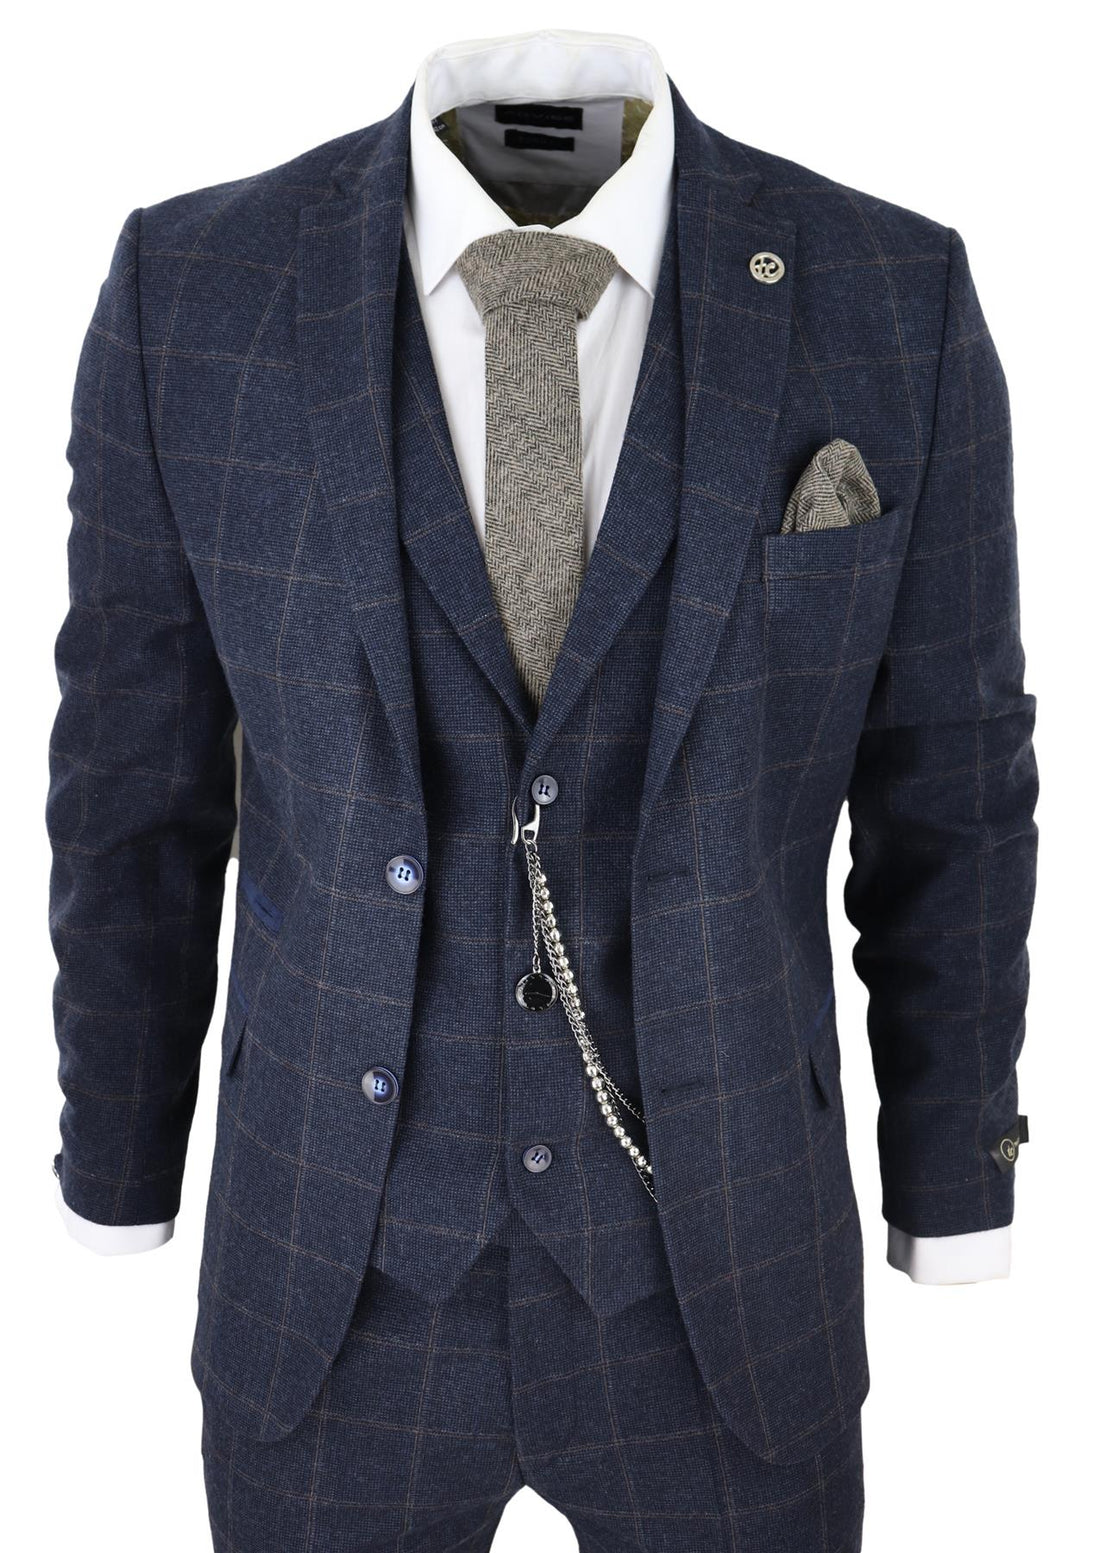 Mens 3 Piece Wool Suit Navy Blue Tweed Check Peaky Blinders 1920 Gatsby Formal - Upperclass Fashions 